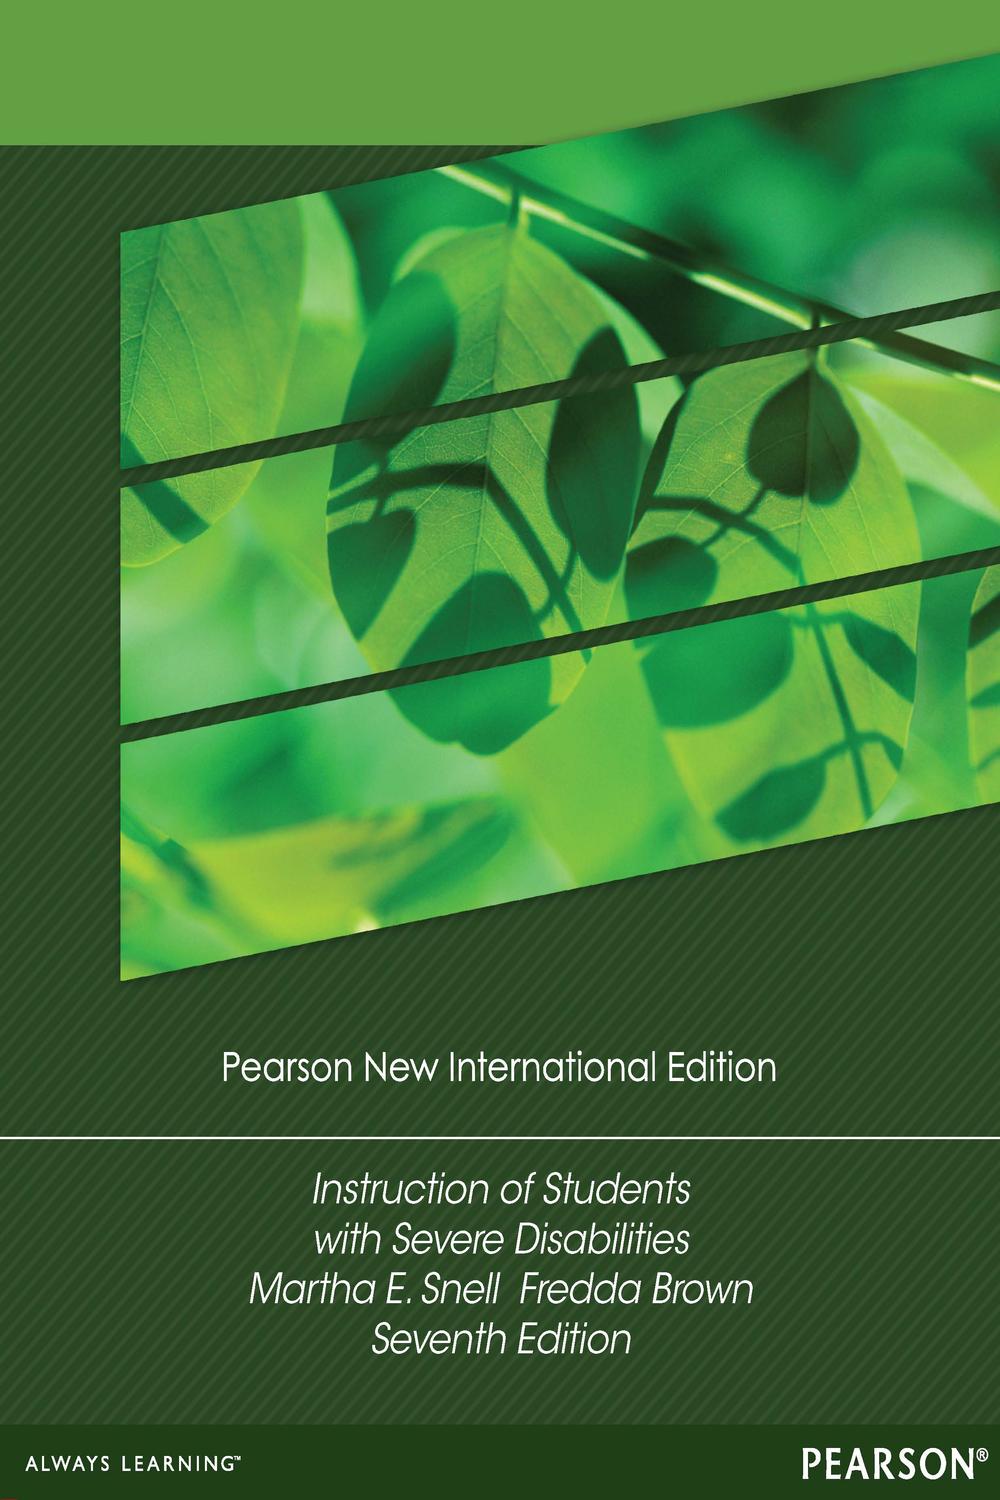 Instruction of Students with Severe Disabilities - Martha Snell, Fredda Brown